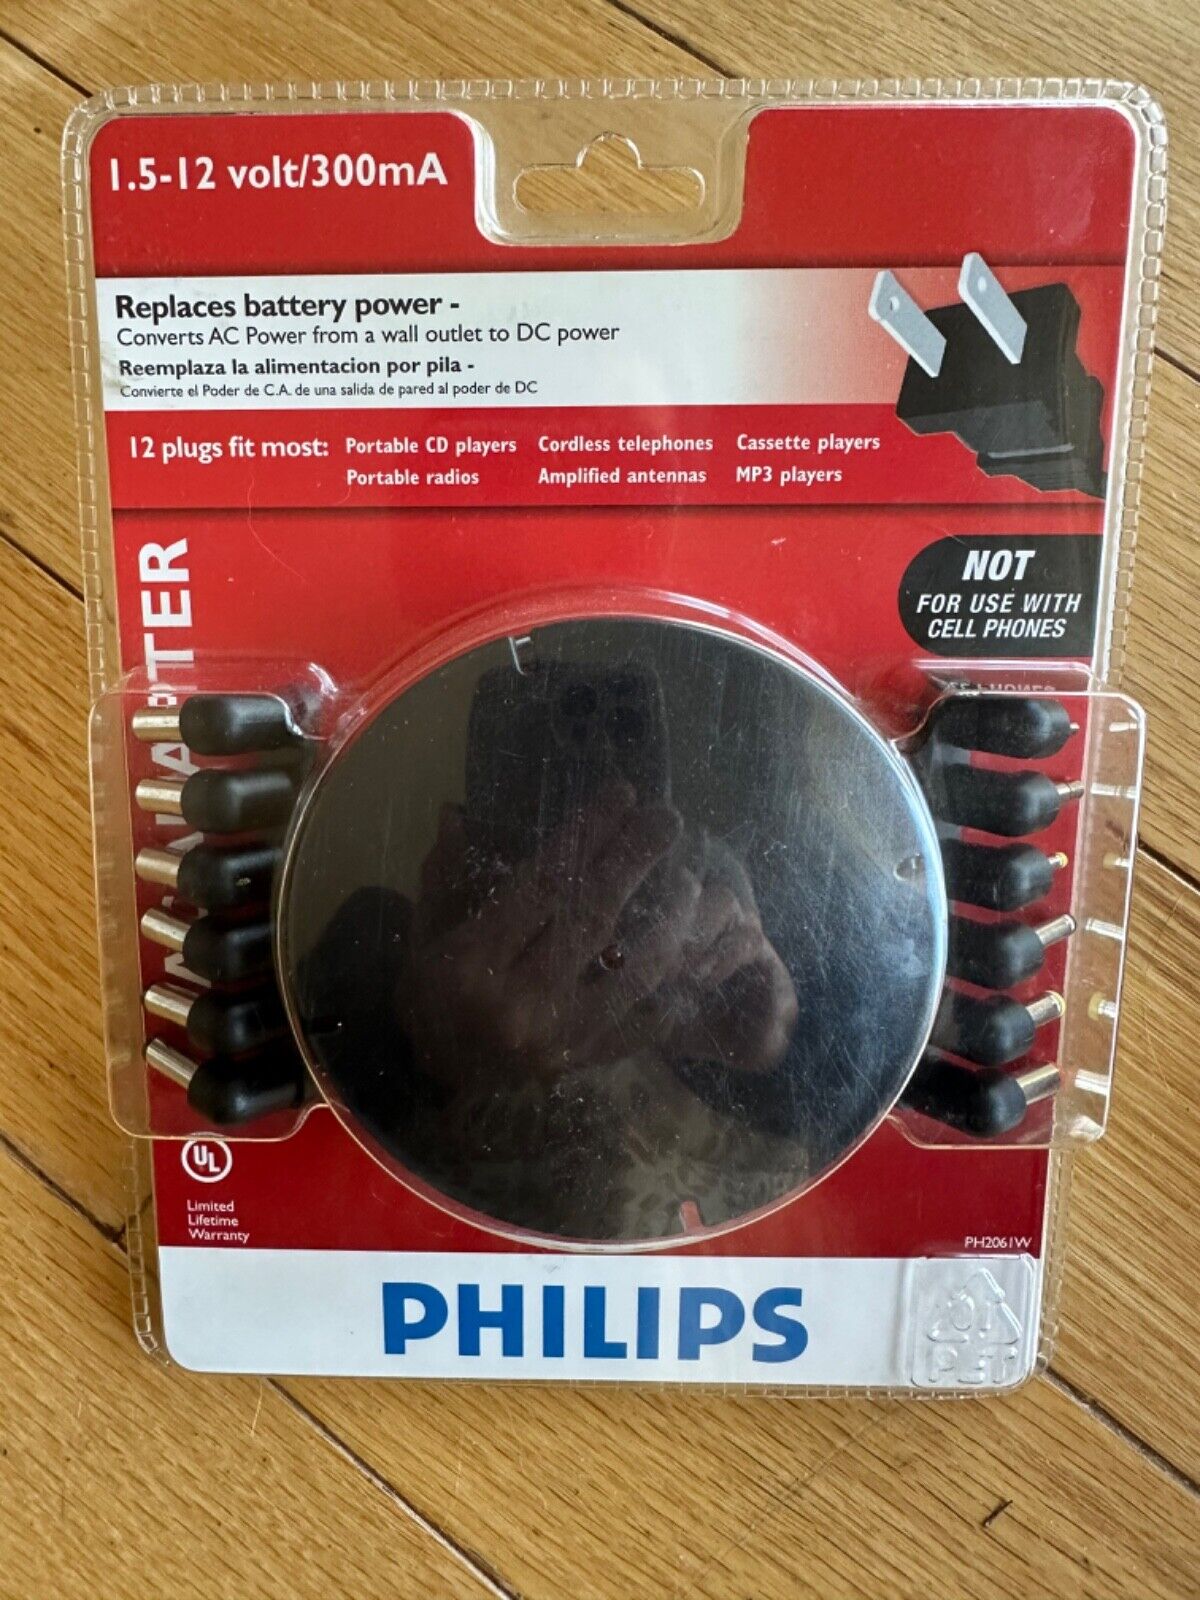 PHILIPS PH2061W Universal AC Adapter new in the package/not for cell phones